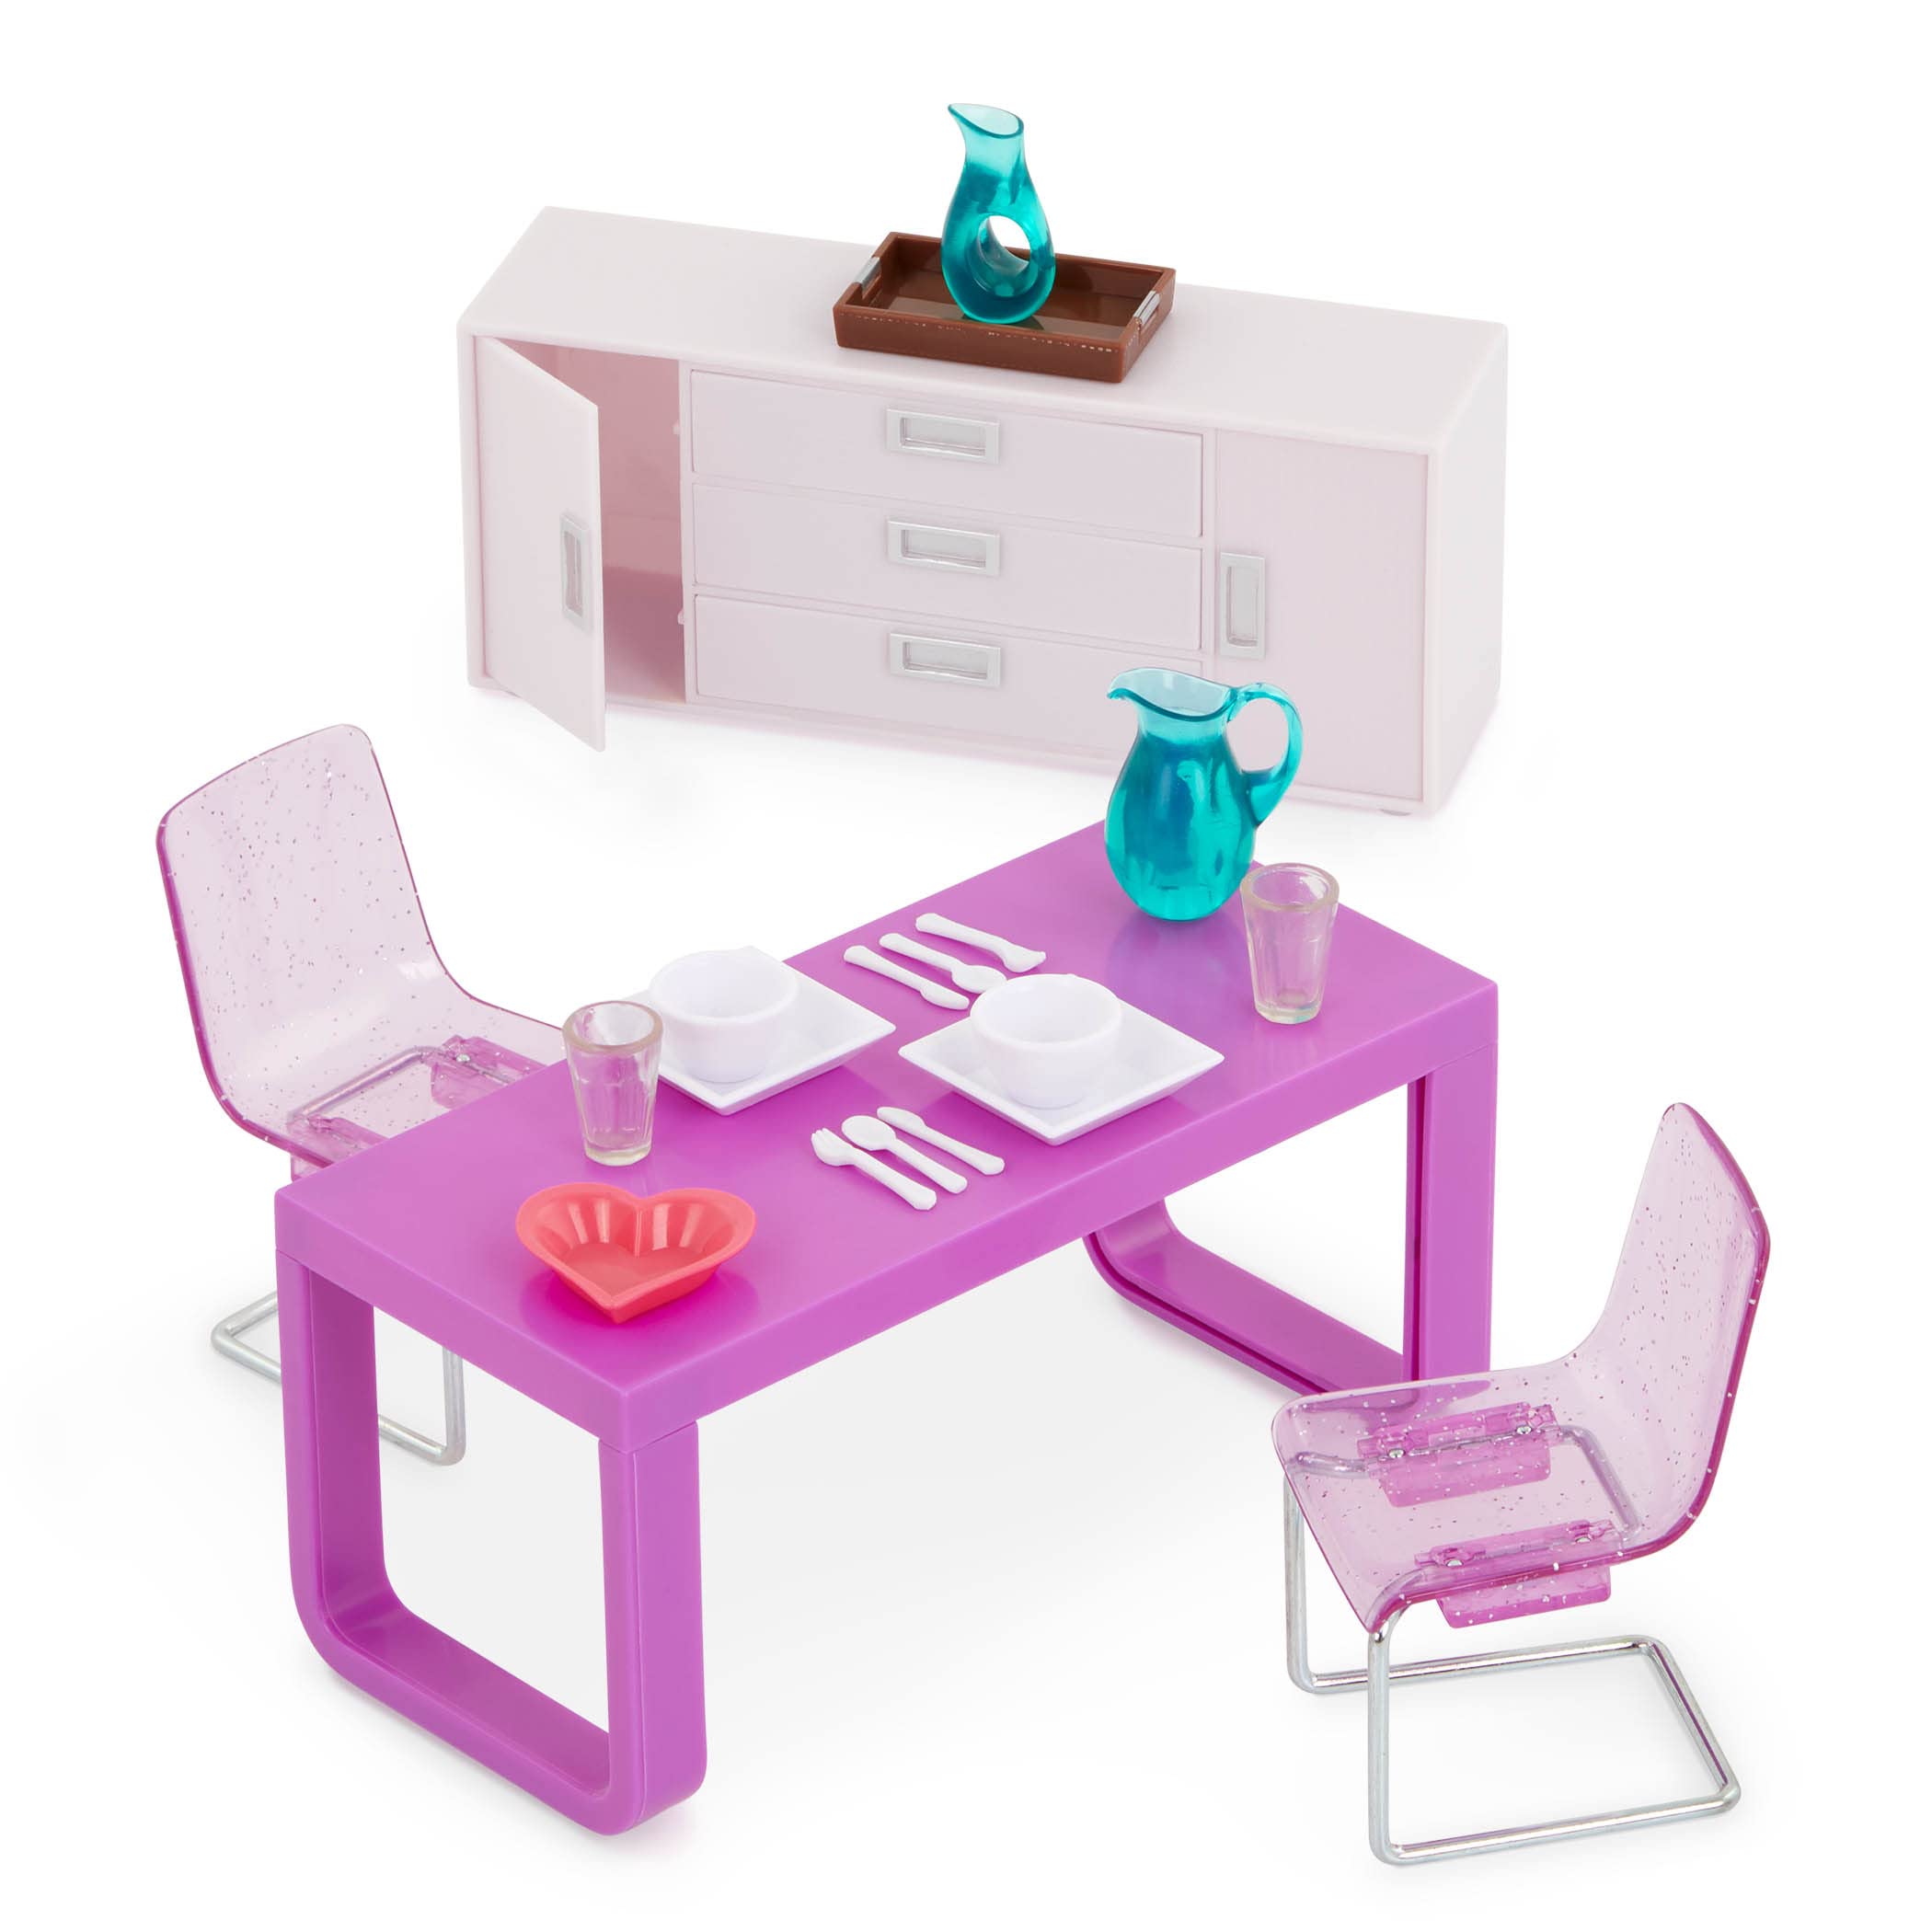 Lori – Mini Doll & Toy Dining Room Furniture – 6-inch Doll & Dollhouse Accessories – Table, Chairs, Dishes, Cutlery – Play Set for Kids – 3 Years + – Amelia’s Dining Room Set